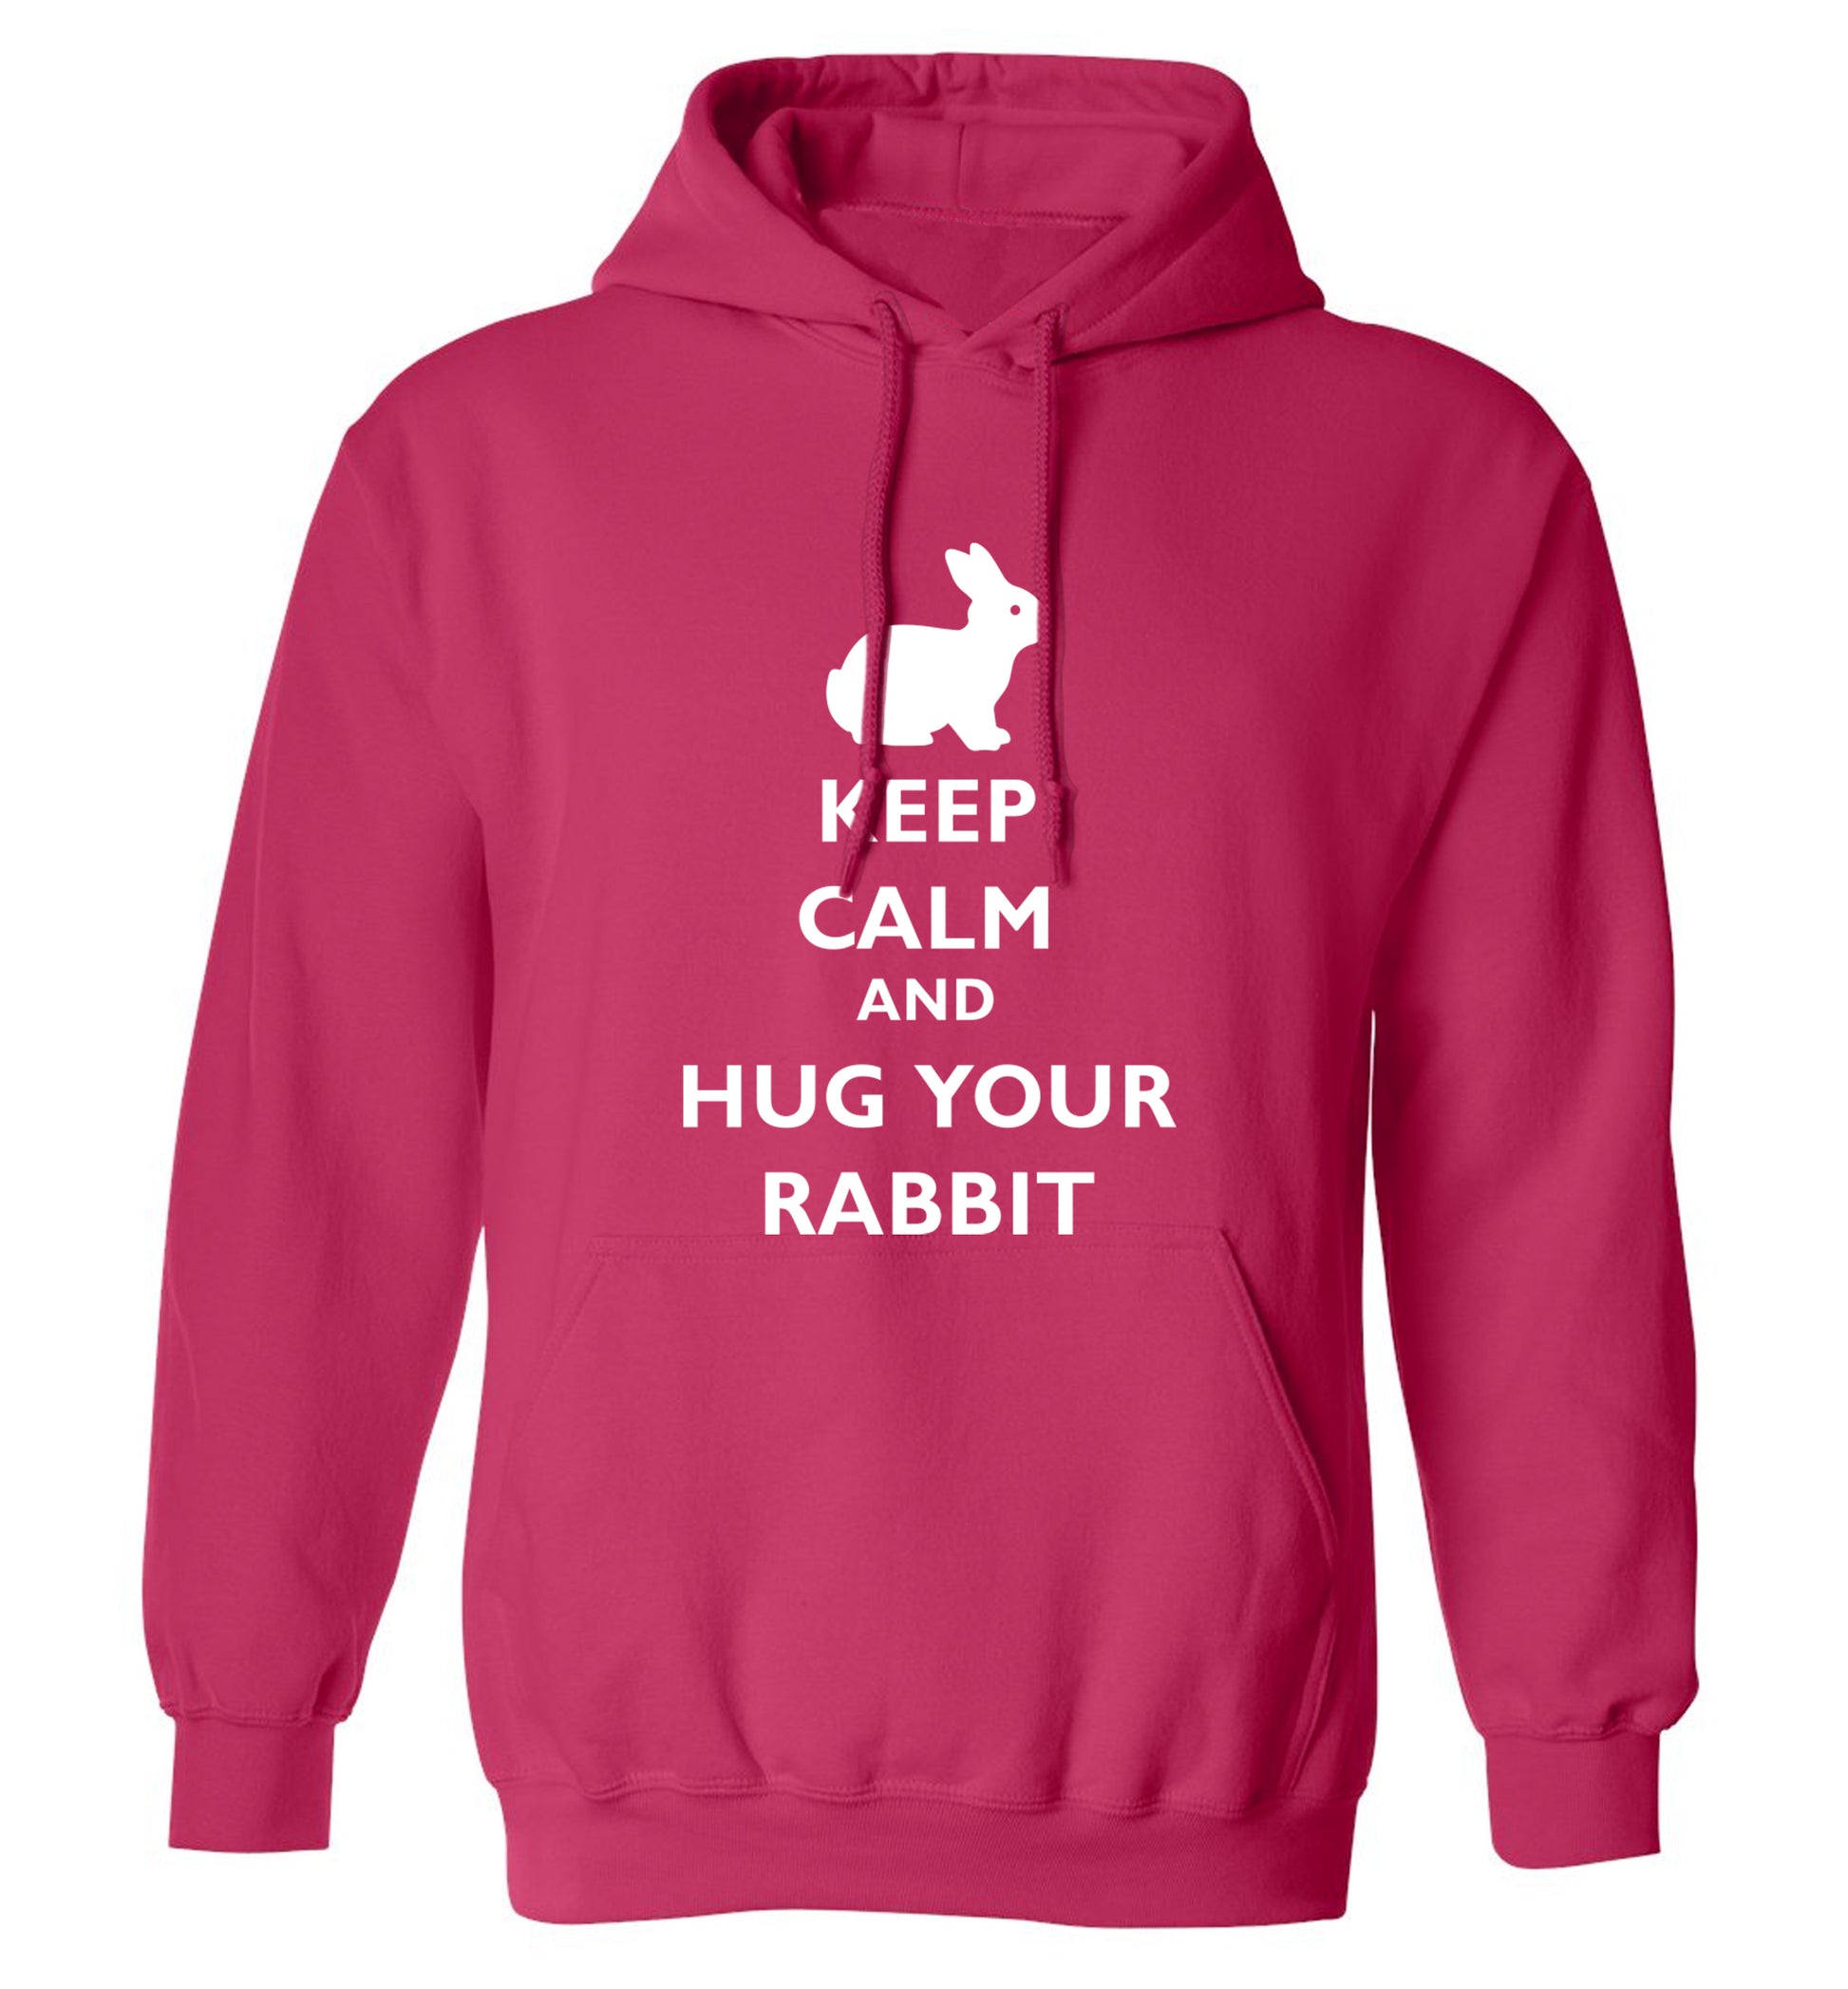 Keep calm and hug your rabbit adults unisex pink hoodie 2XL